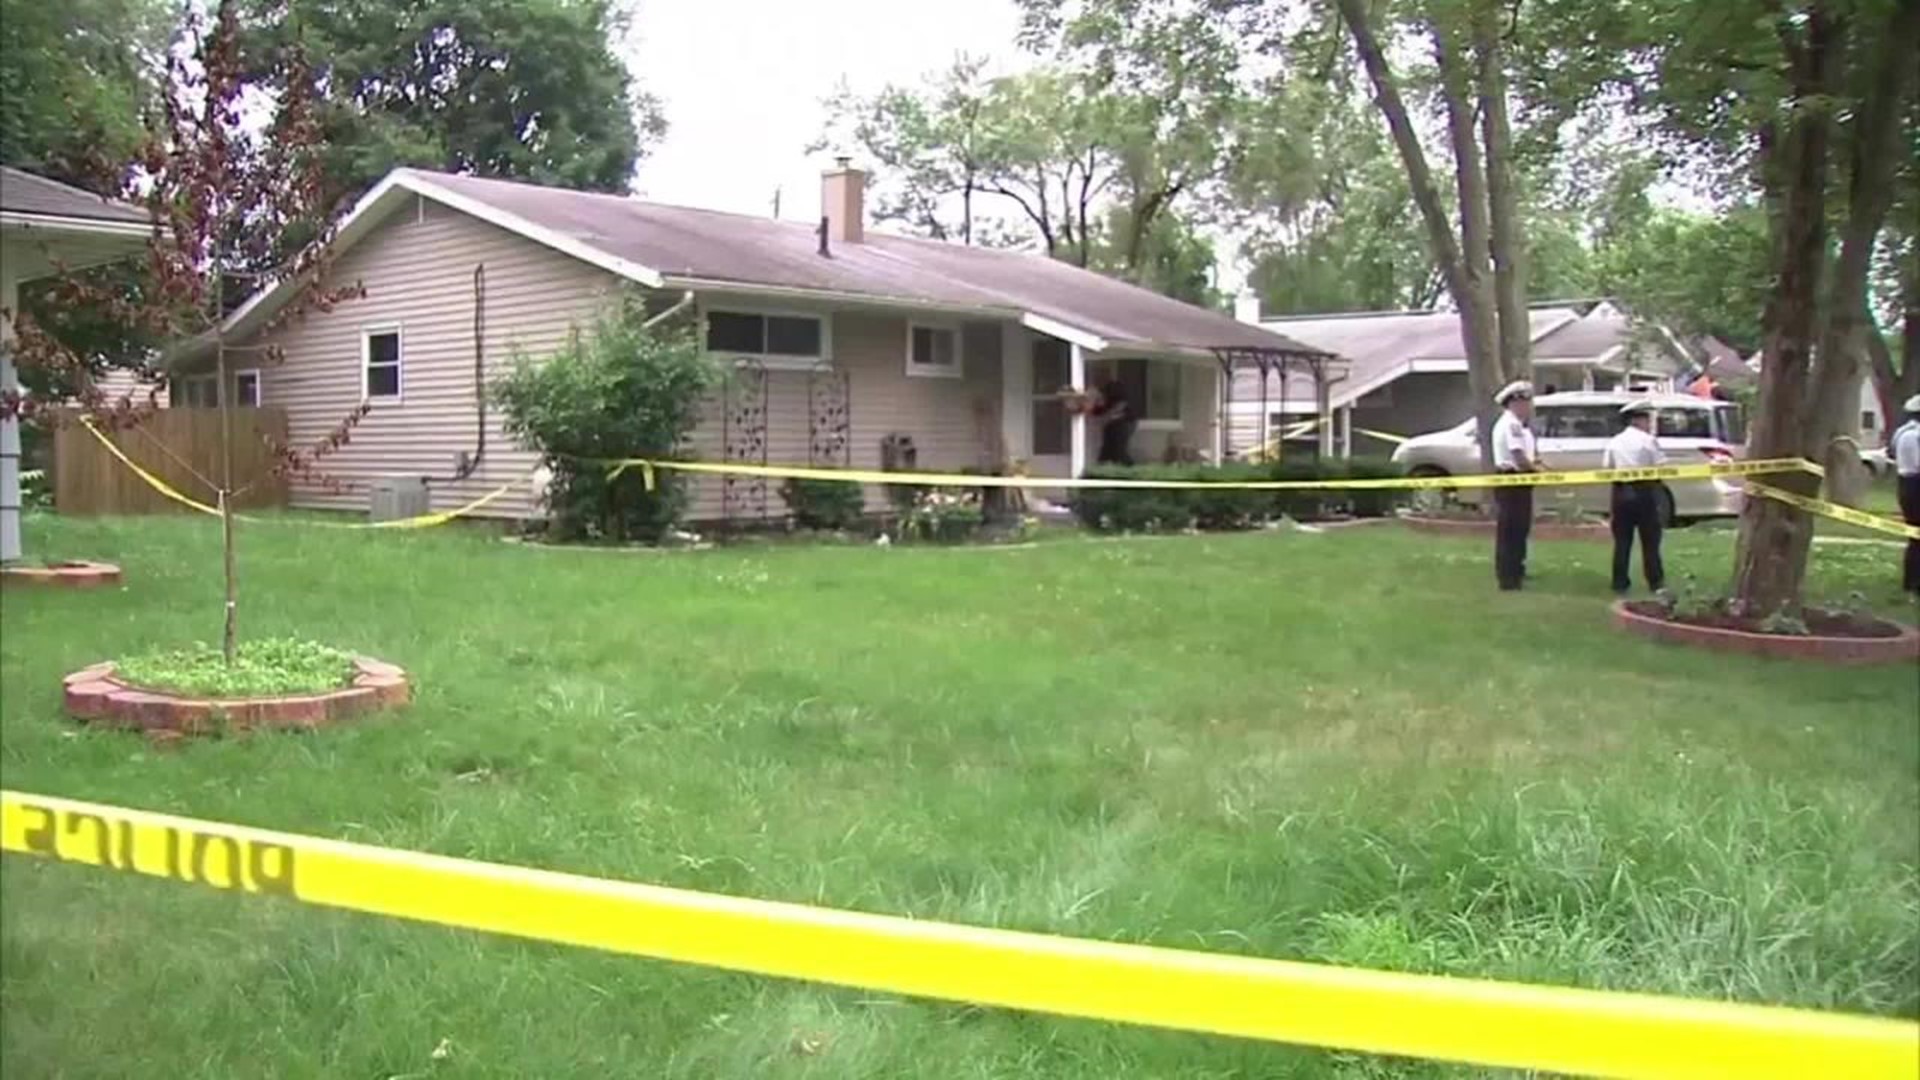 Officer Walked Away From Scene After Shooting 4-Year-Old, Family Claims